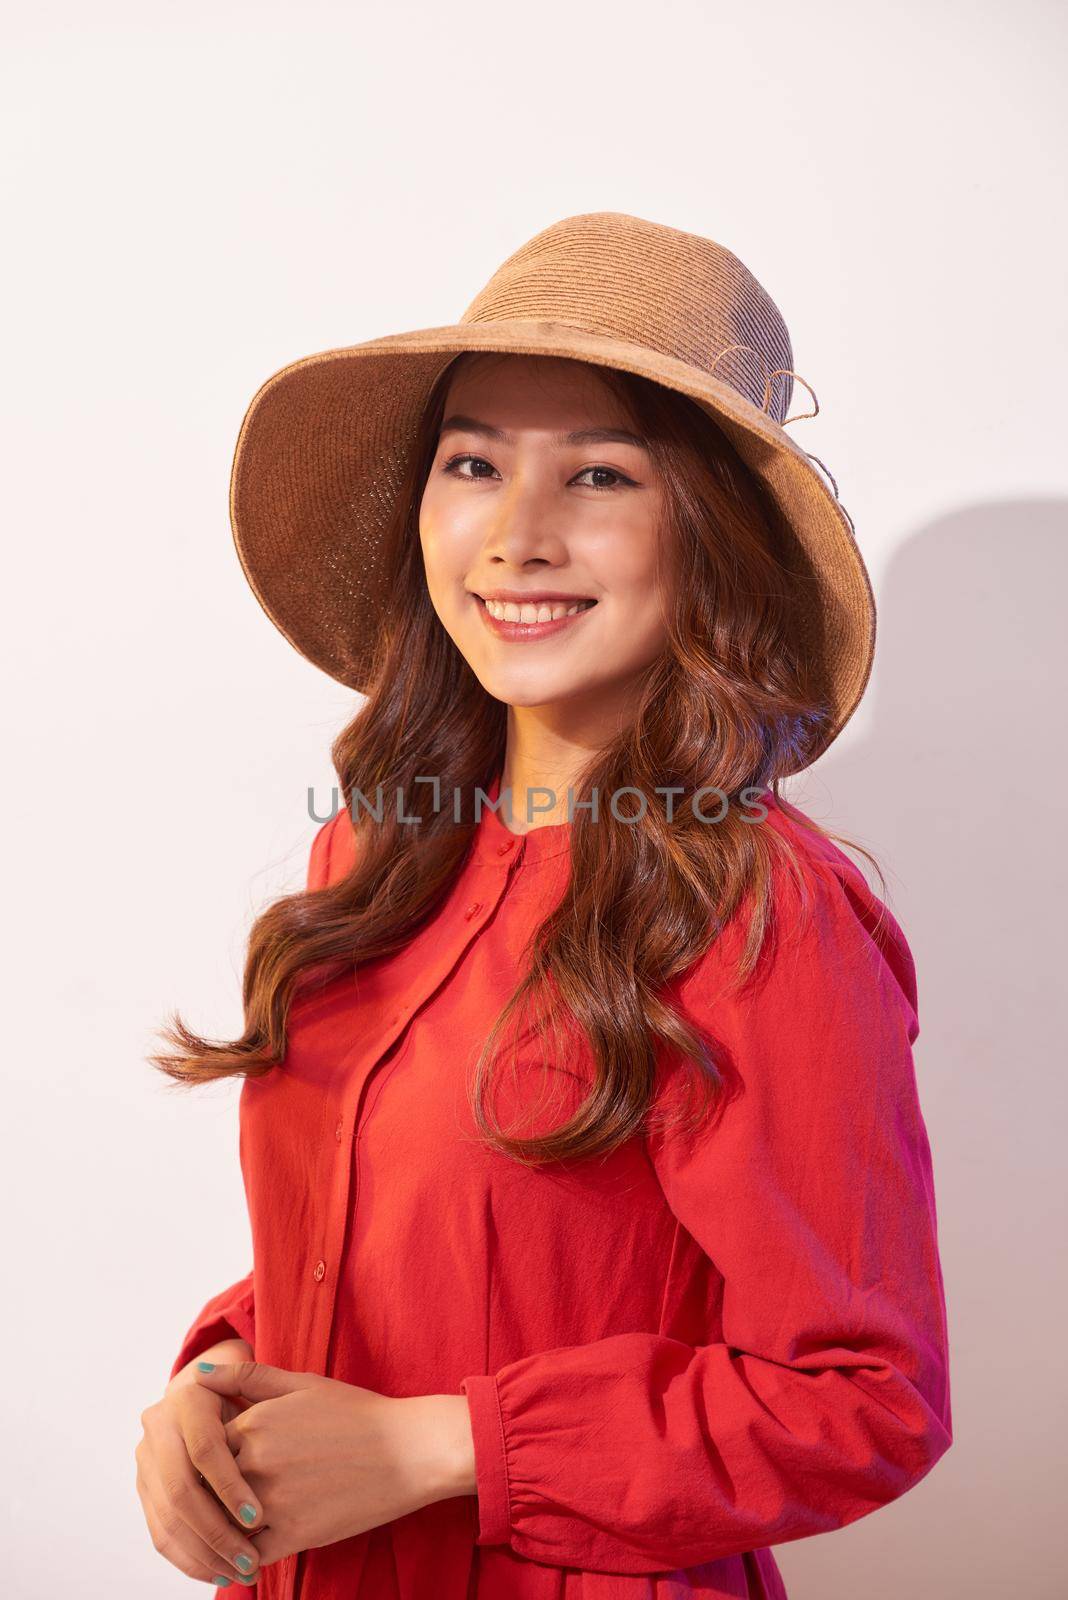 Woman wearing a straw hat and smiling. by makidotvn